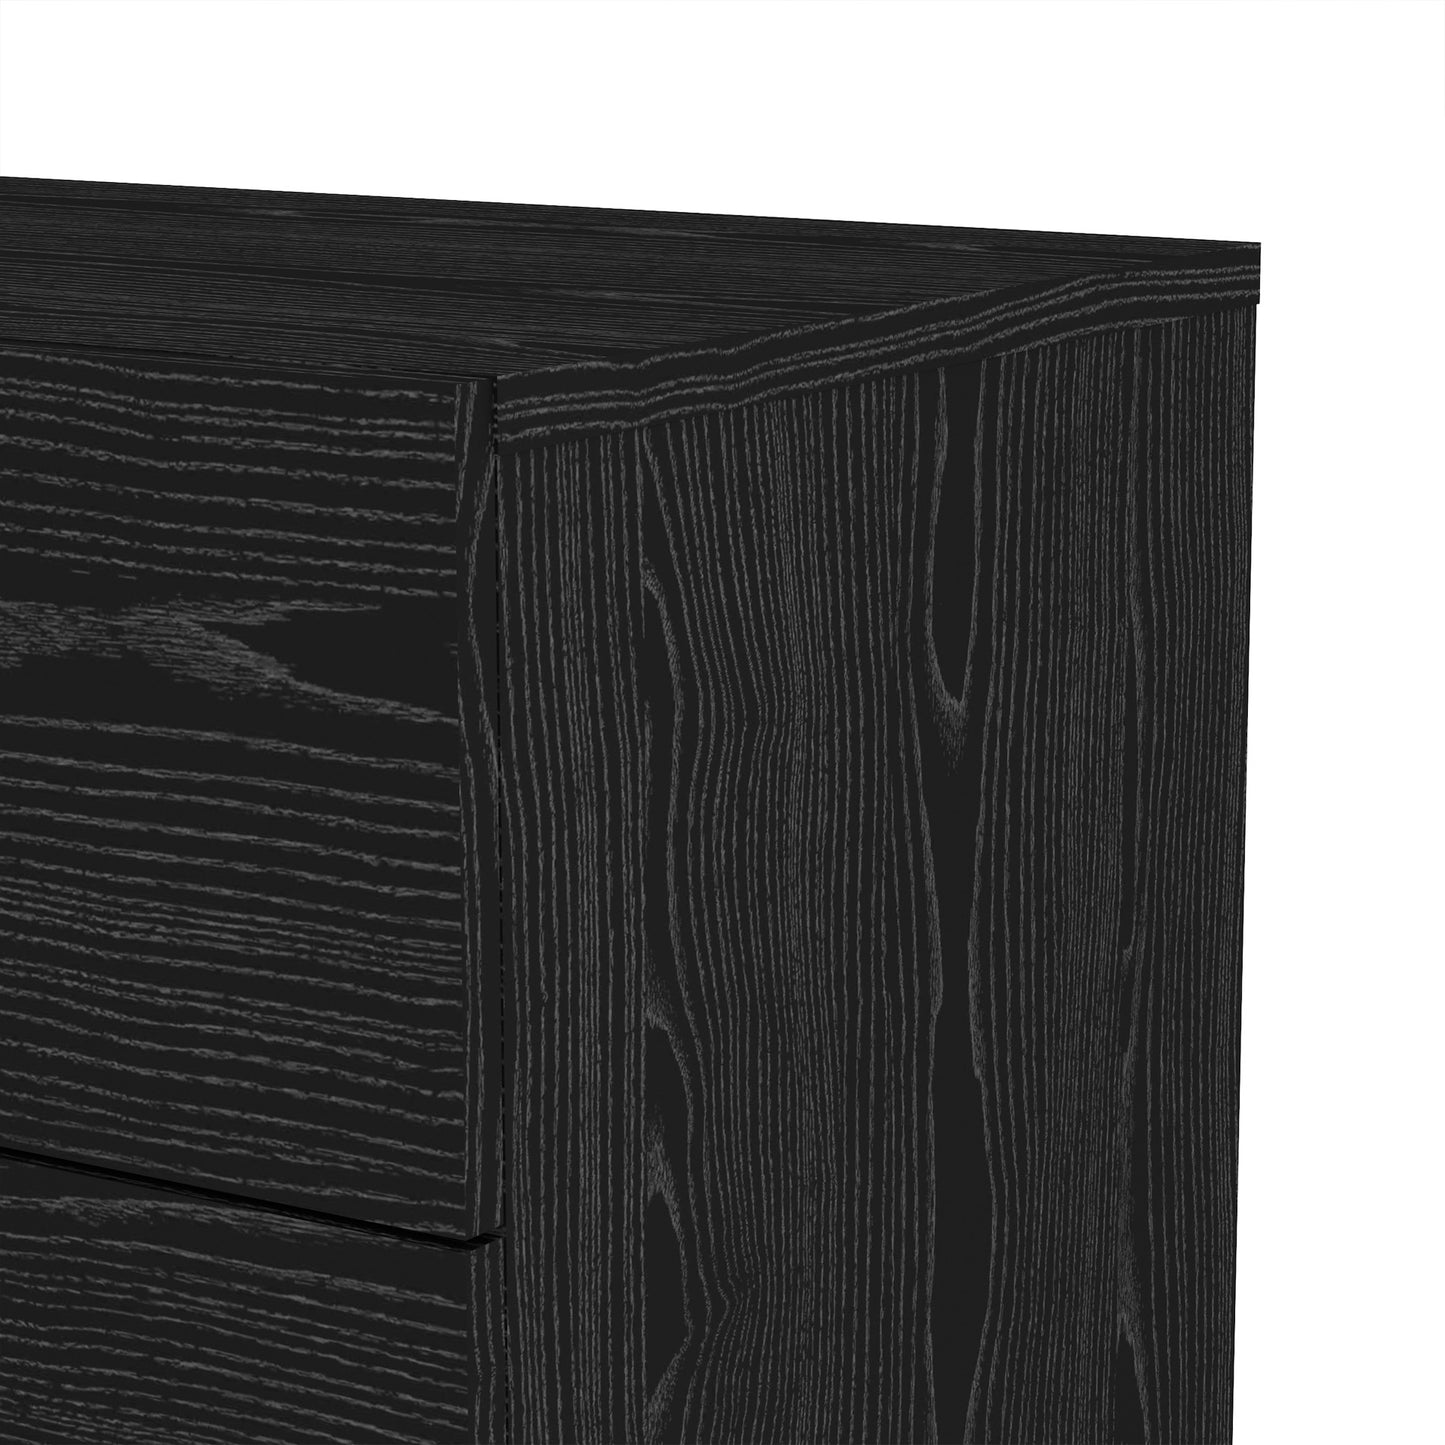 Furniture To Go Pepe Wide Chest of 8 Drawers (4+4) in Black Woodgrain